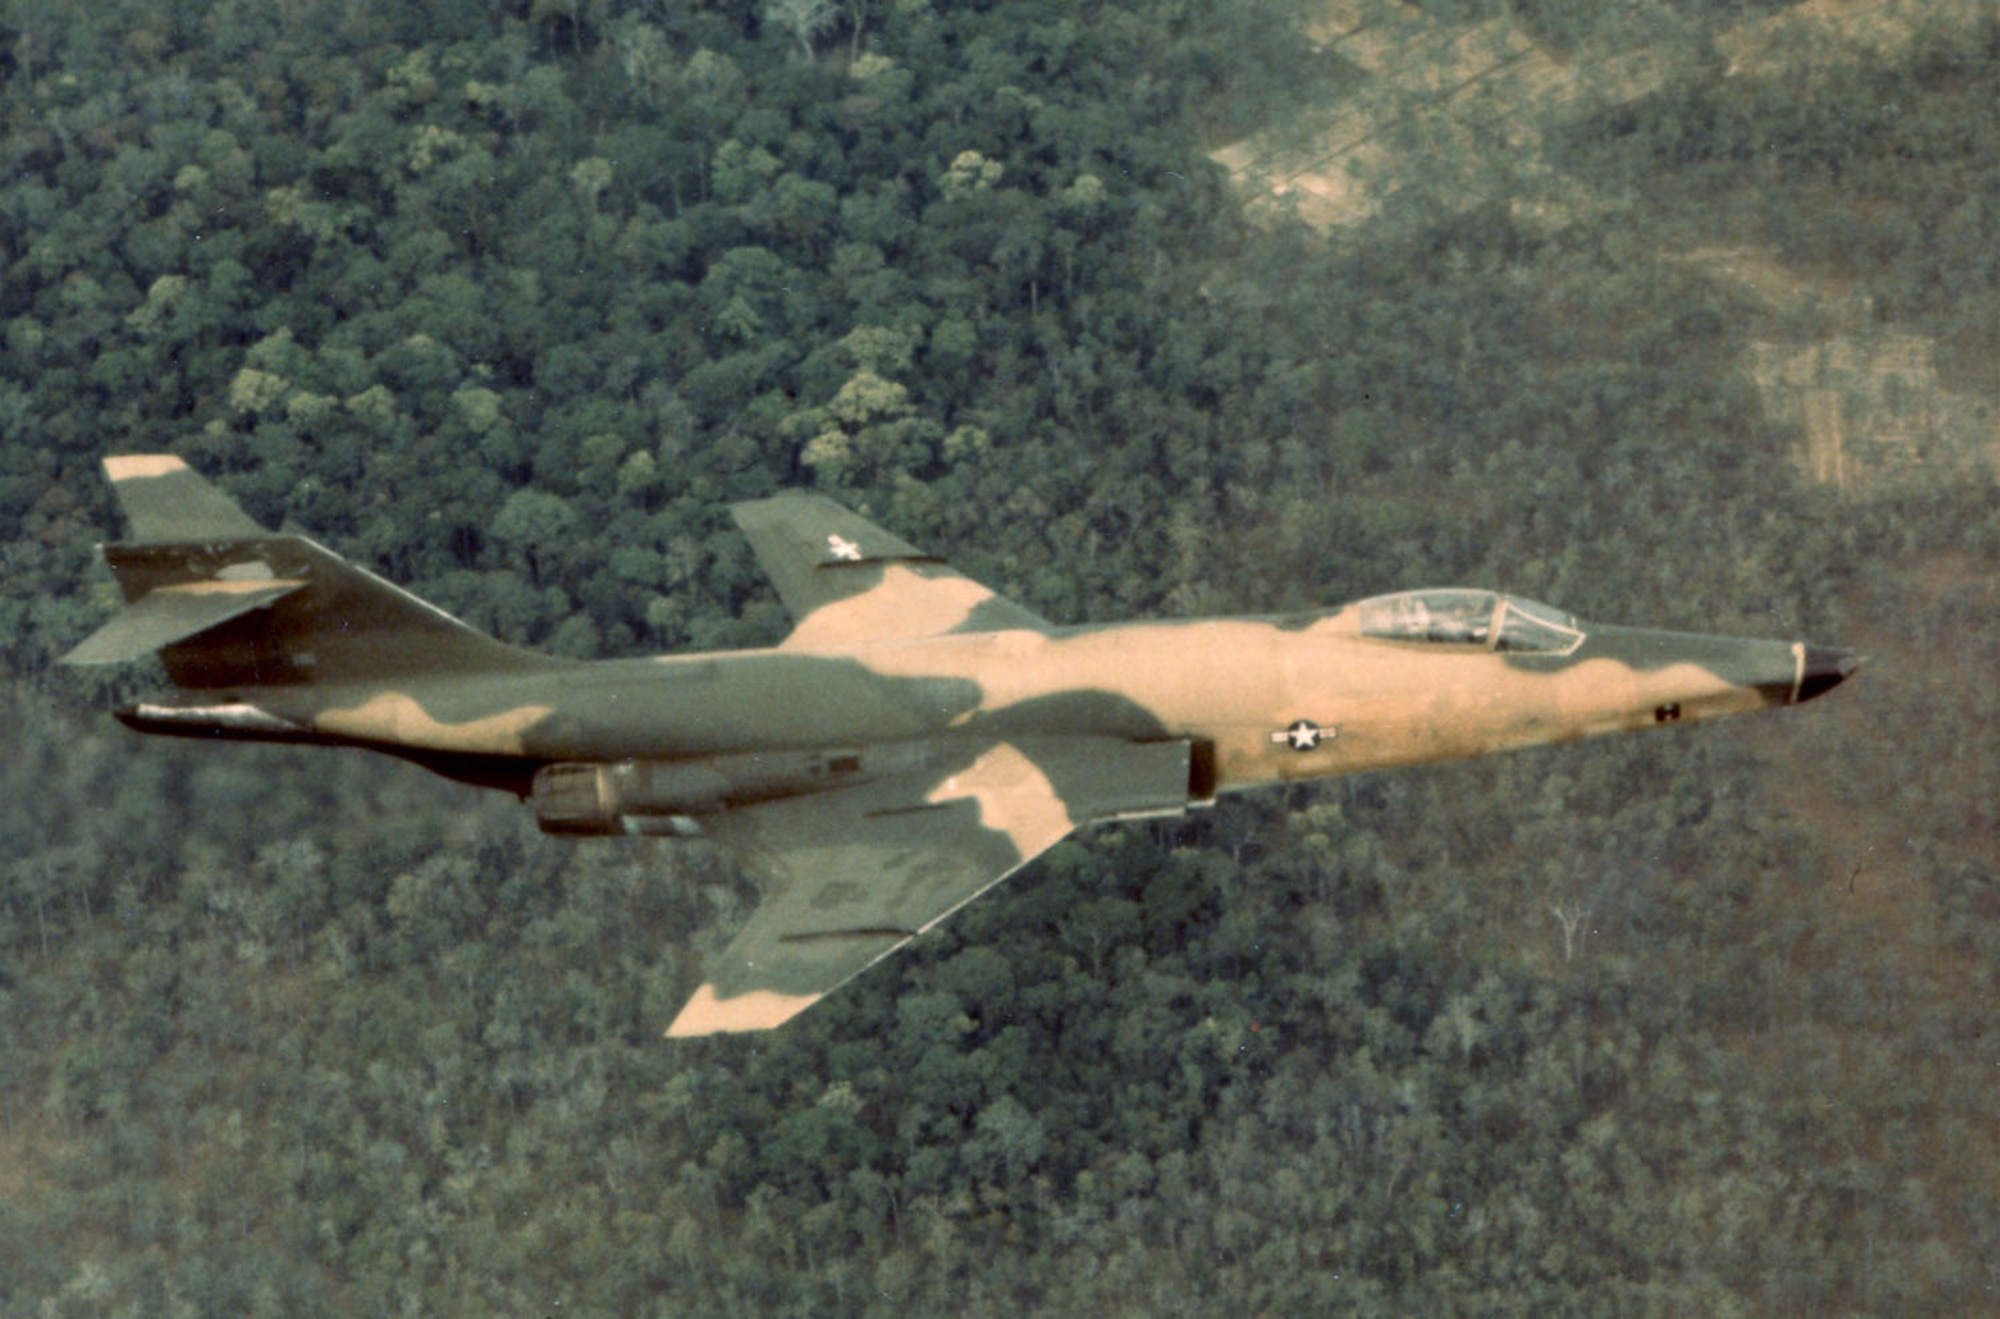 McDonnell RF-101C in flight over Vietnam in May 1967. (U.S. Air Force photo)